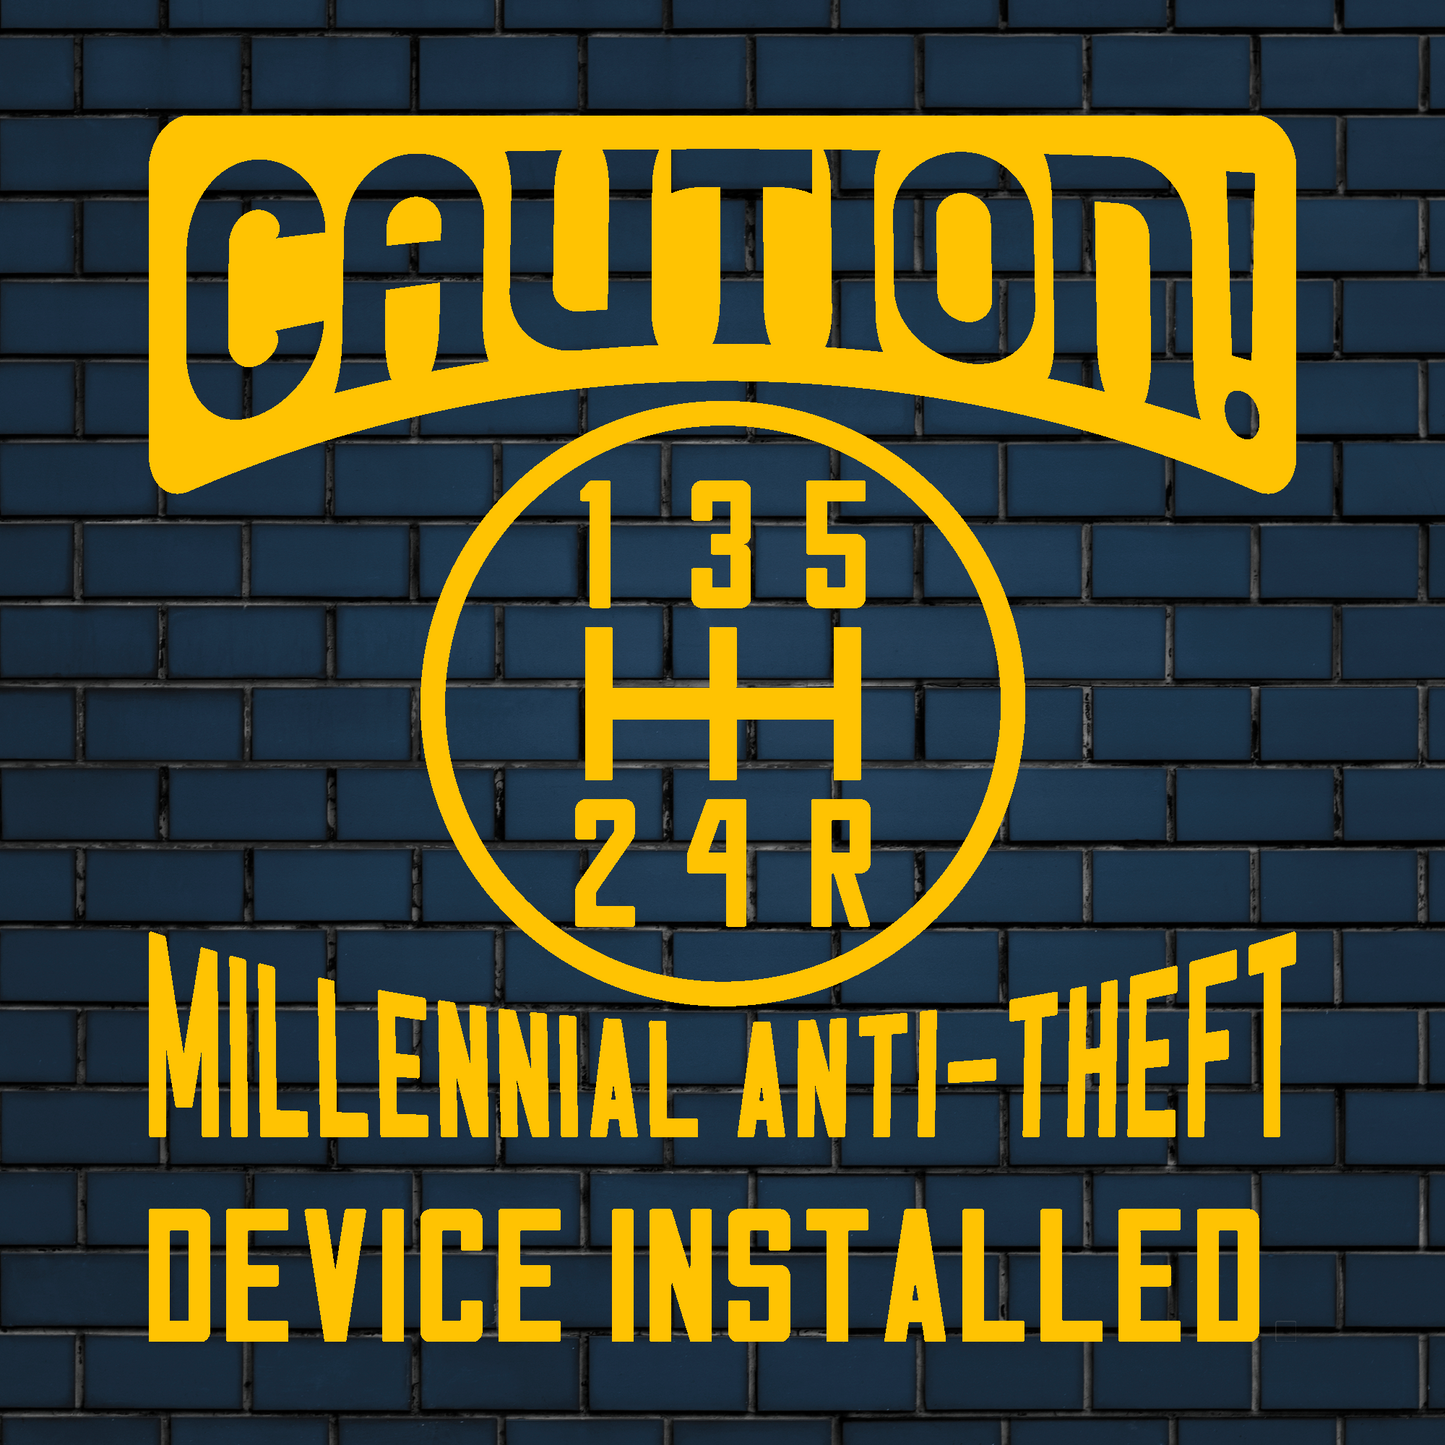 Caution millennial anti theft device installed decal